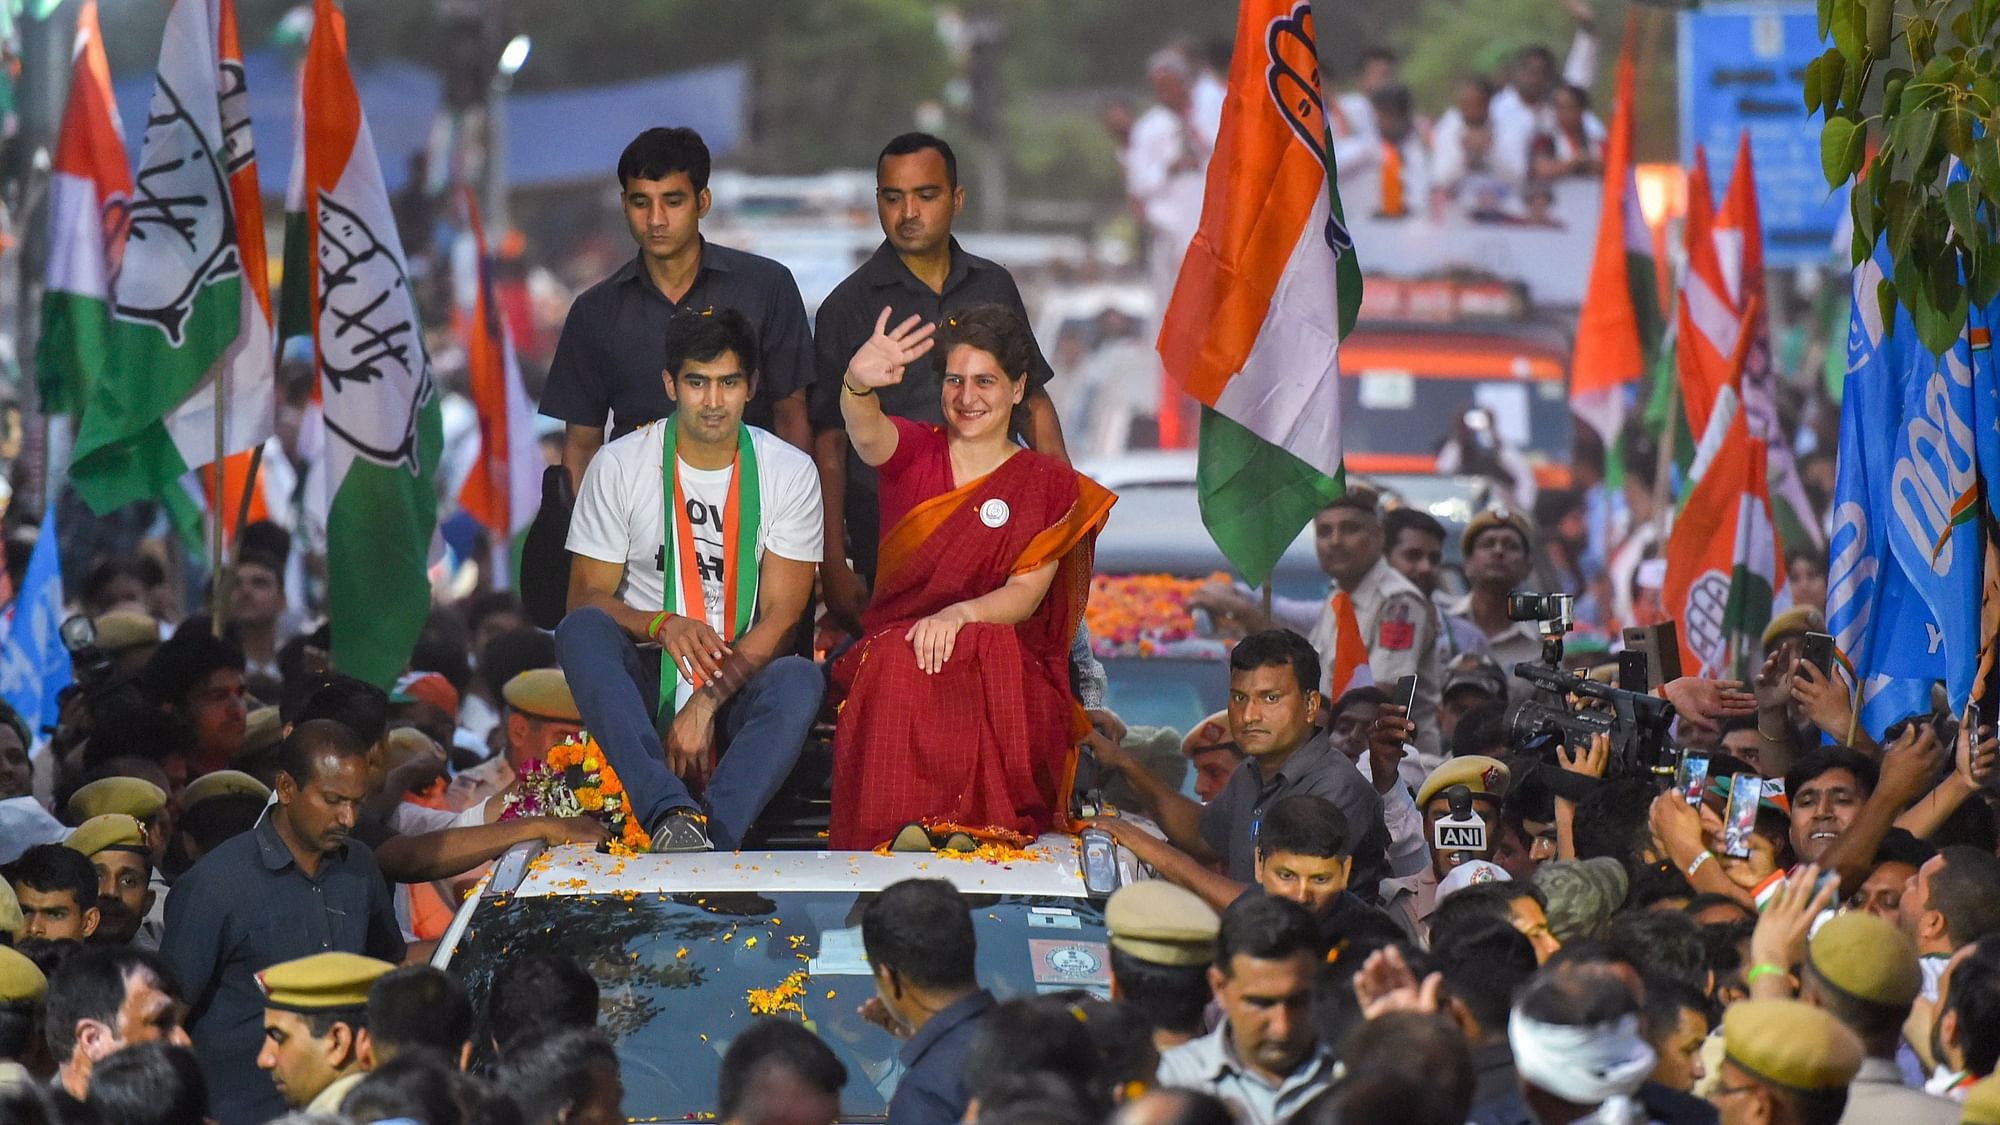 ongress General Secretary Priyanka Gandhi Vadra with partys South Delhi candidate boxer Vijender Singh waves at supporters during an election campaign roadshow for the Lok Sabha polls, in New Delhi, Wednesday, May 8, 2019.&nbsp;